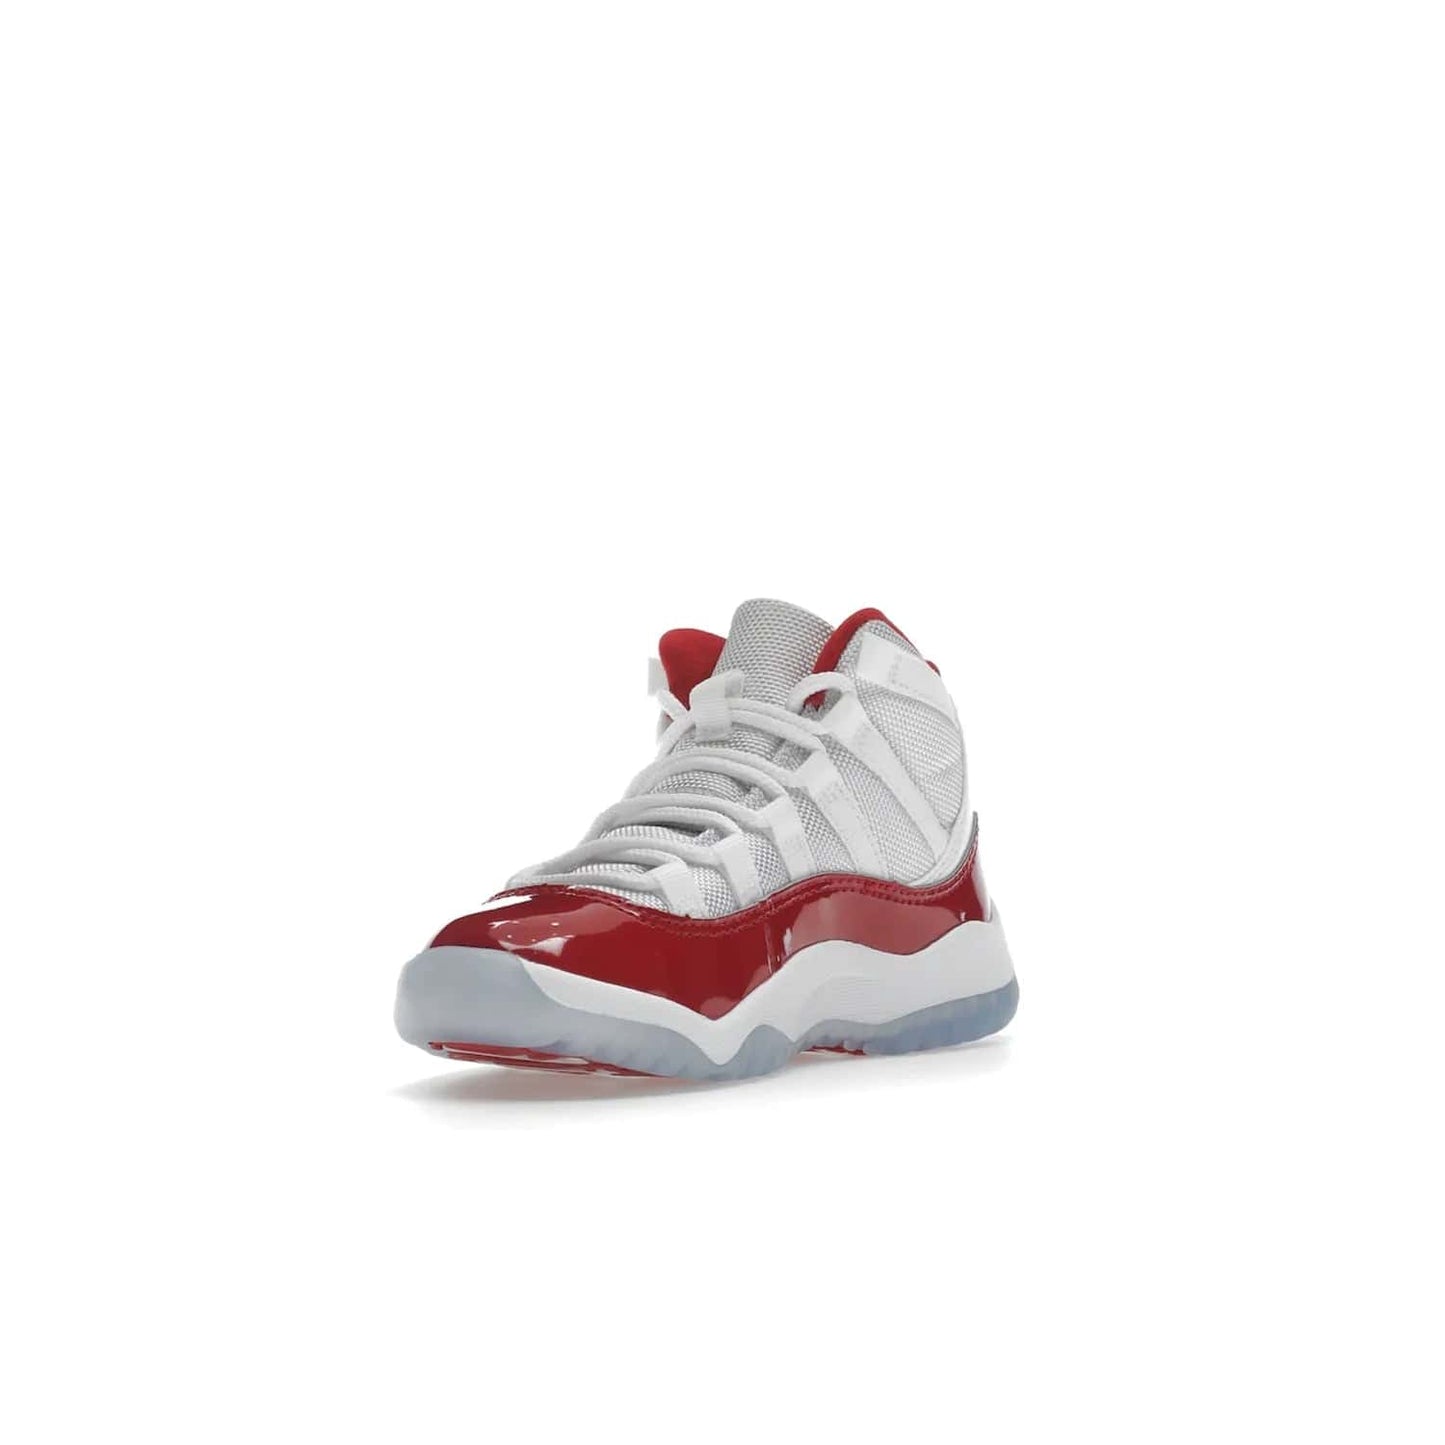 Jordan 11 Retro Cherry (2022) (PS) - Image 14 - Only at www.BallersClubKickz.com - An iconic silhouette with a timeless look, the Air Jordan 11 Retro Cherry 2022 PS features a crisp White, Varsity Red and Black colorway. The upper is made of ballistic mesh, a red patent leather mudguard, '23' branding and white Phylon midsole. Get optimal cushioning and comfort on December 10th, 2022. Don't miss out.